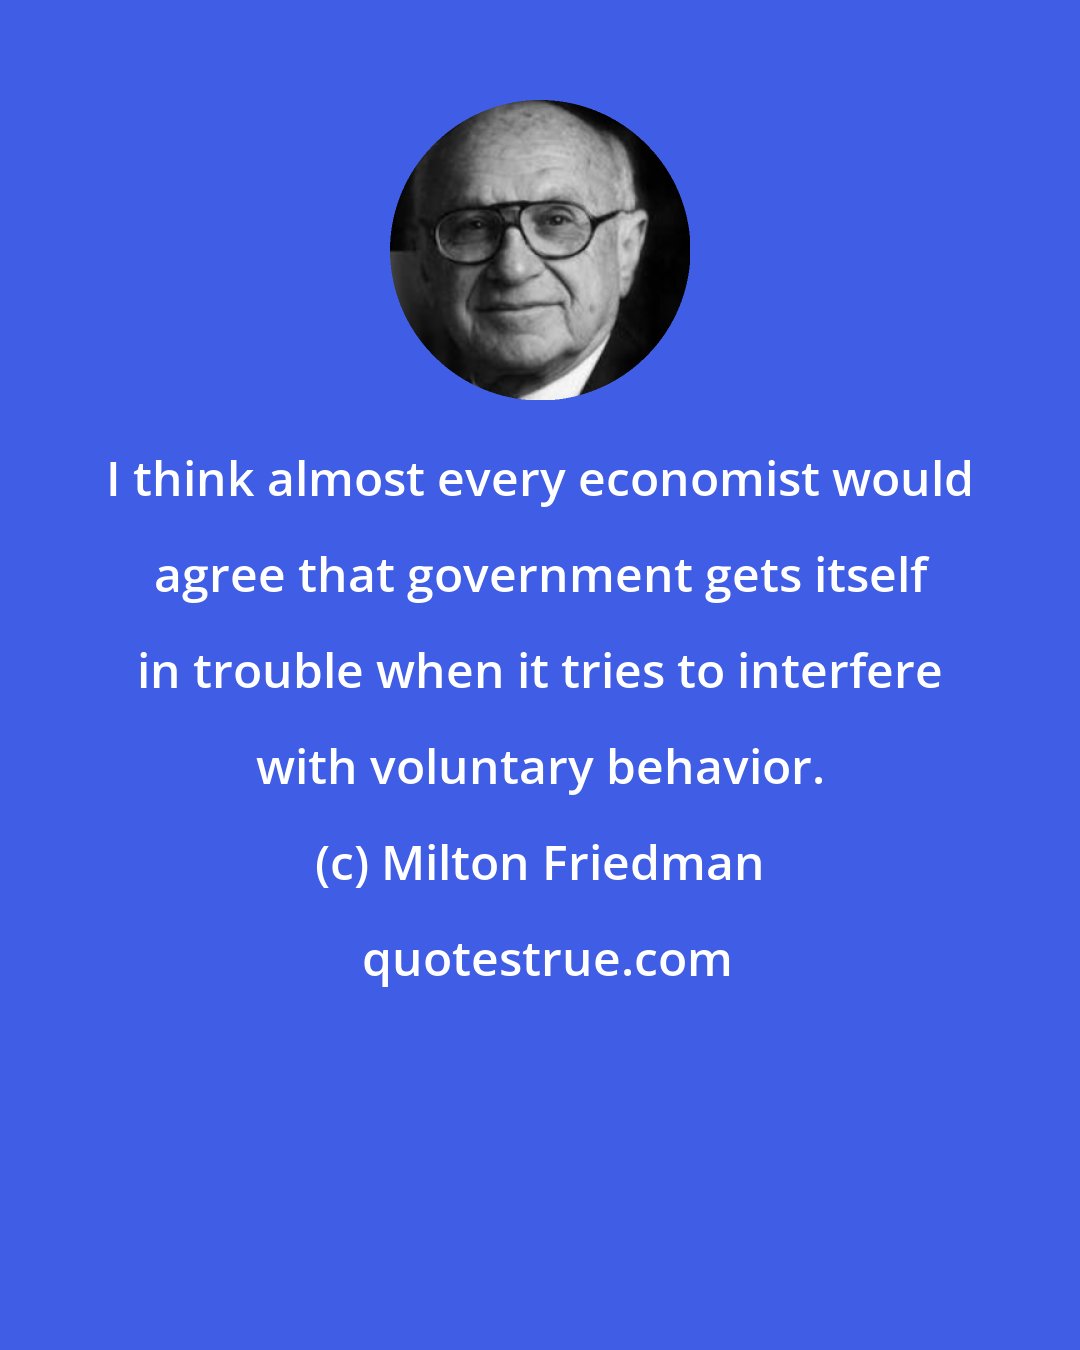 Milton Friedman: I think almost every economist would agree that government gets itself in trouble when it tries to interfere with voluntary behavior.